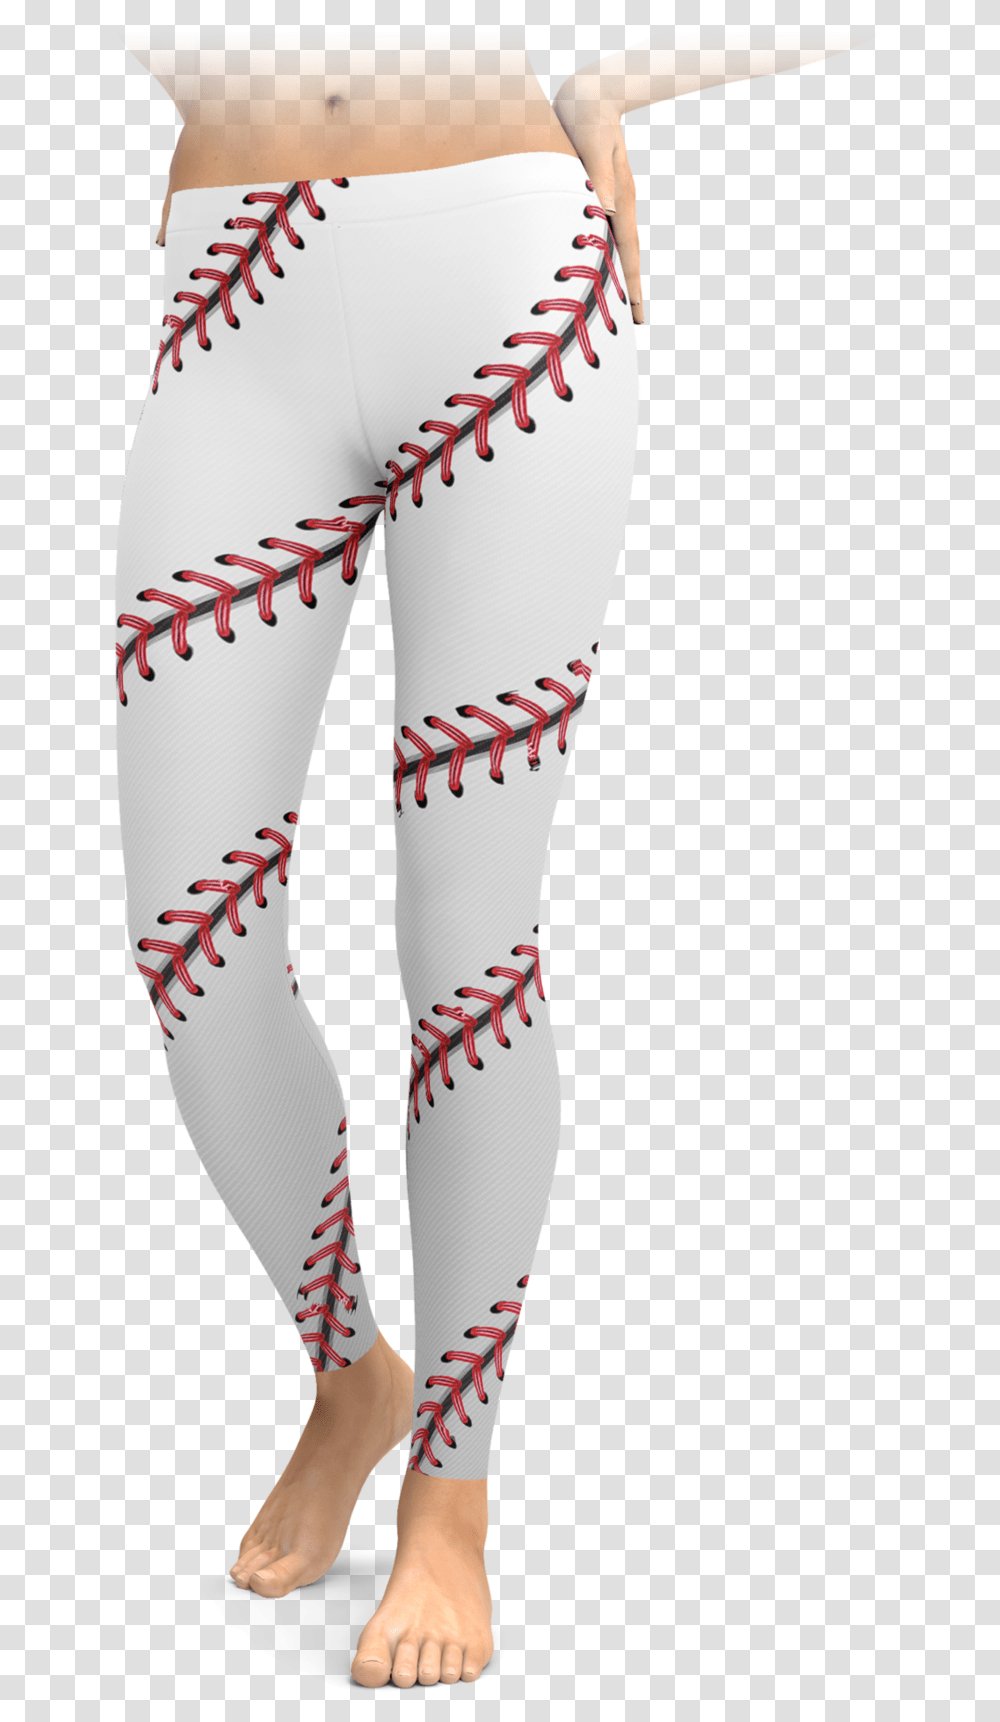 Shorts And Fish Net Stockings, Pants, Apparel, Tights Transparent Png